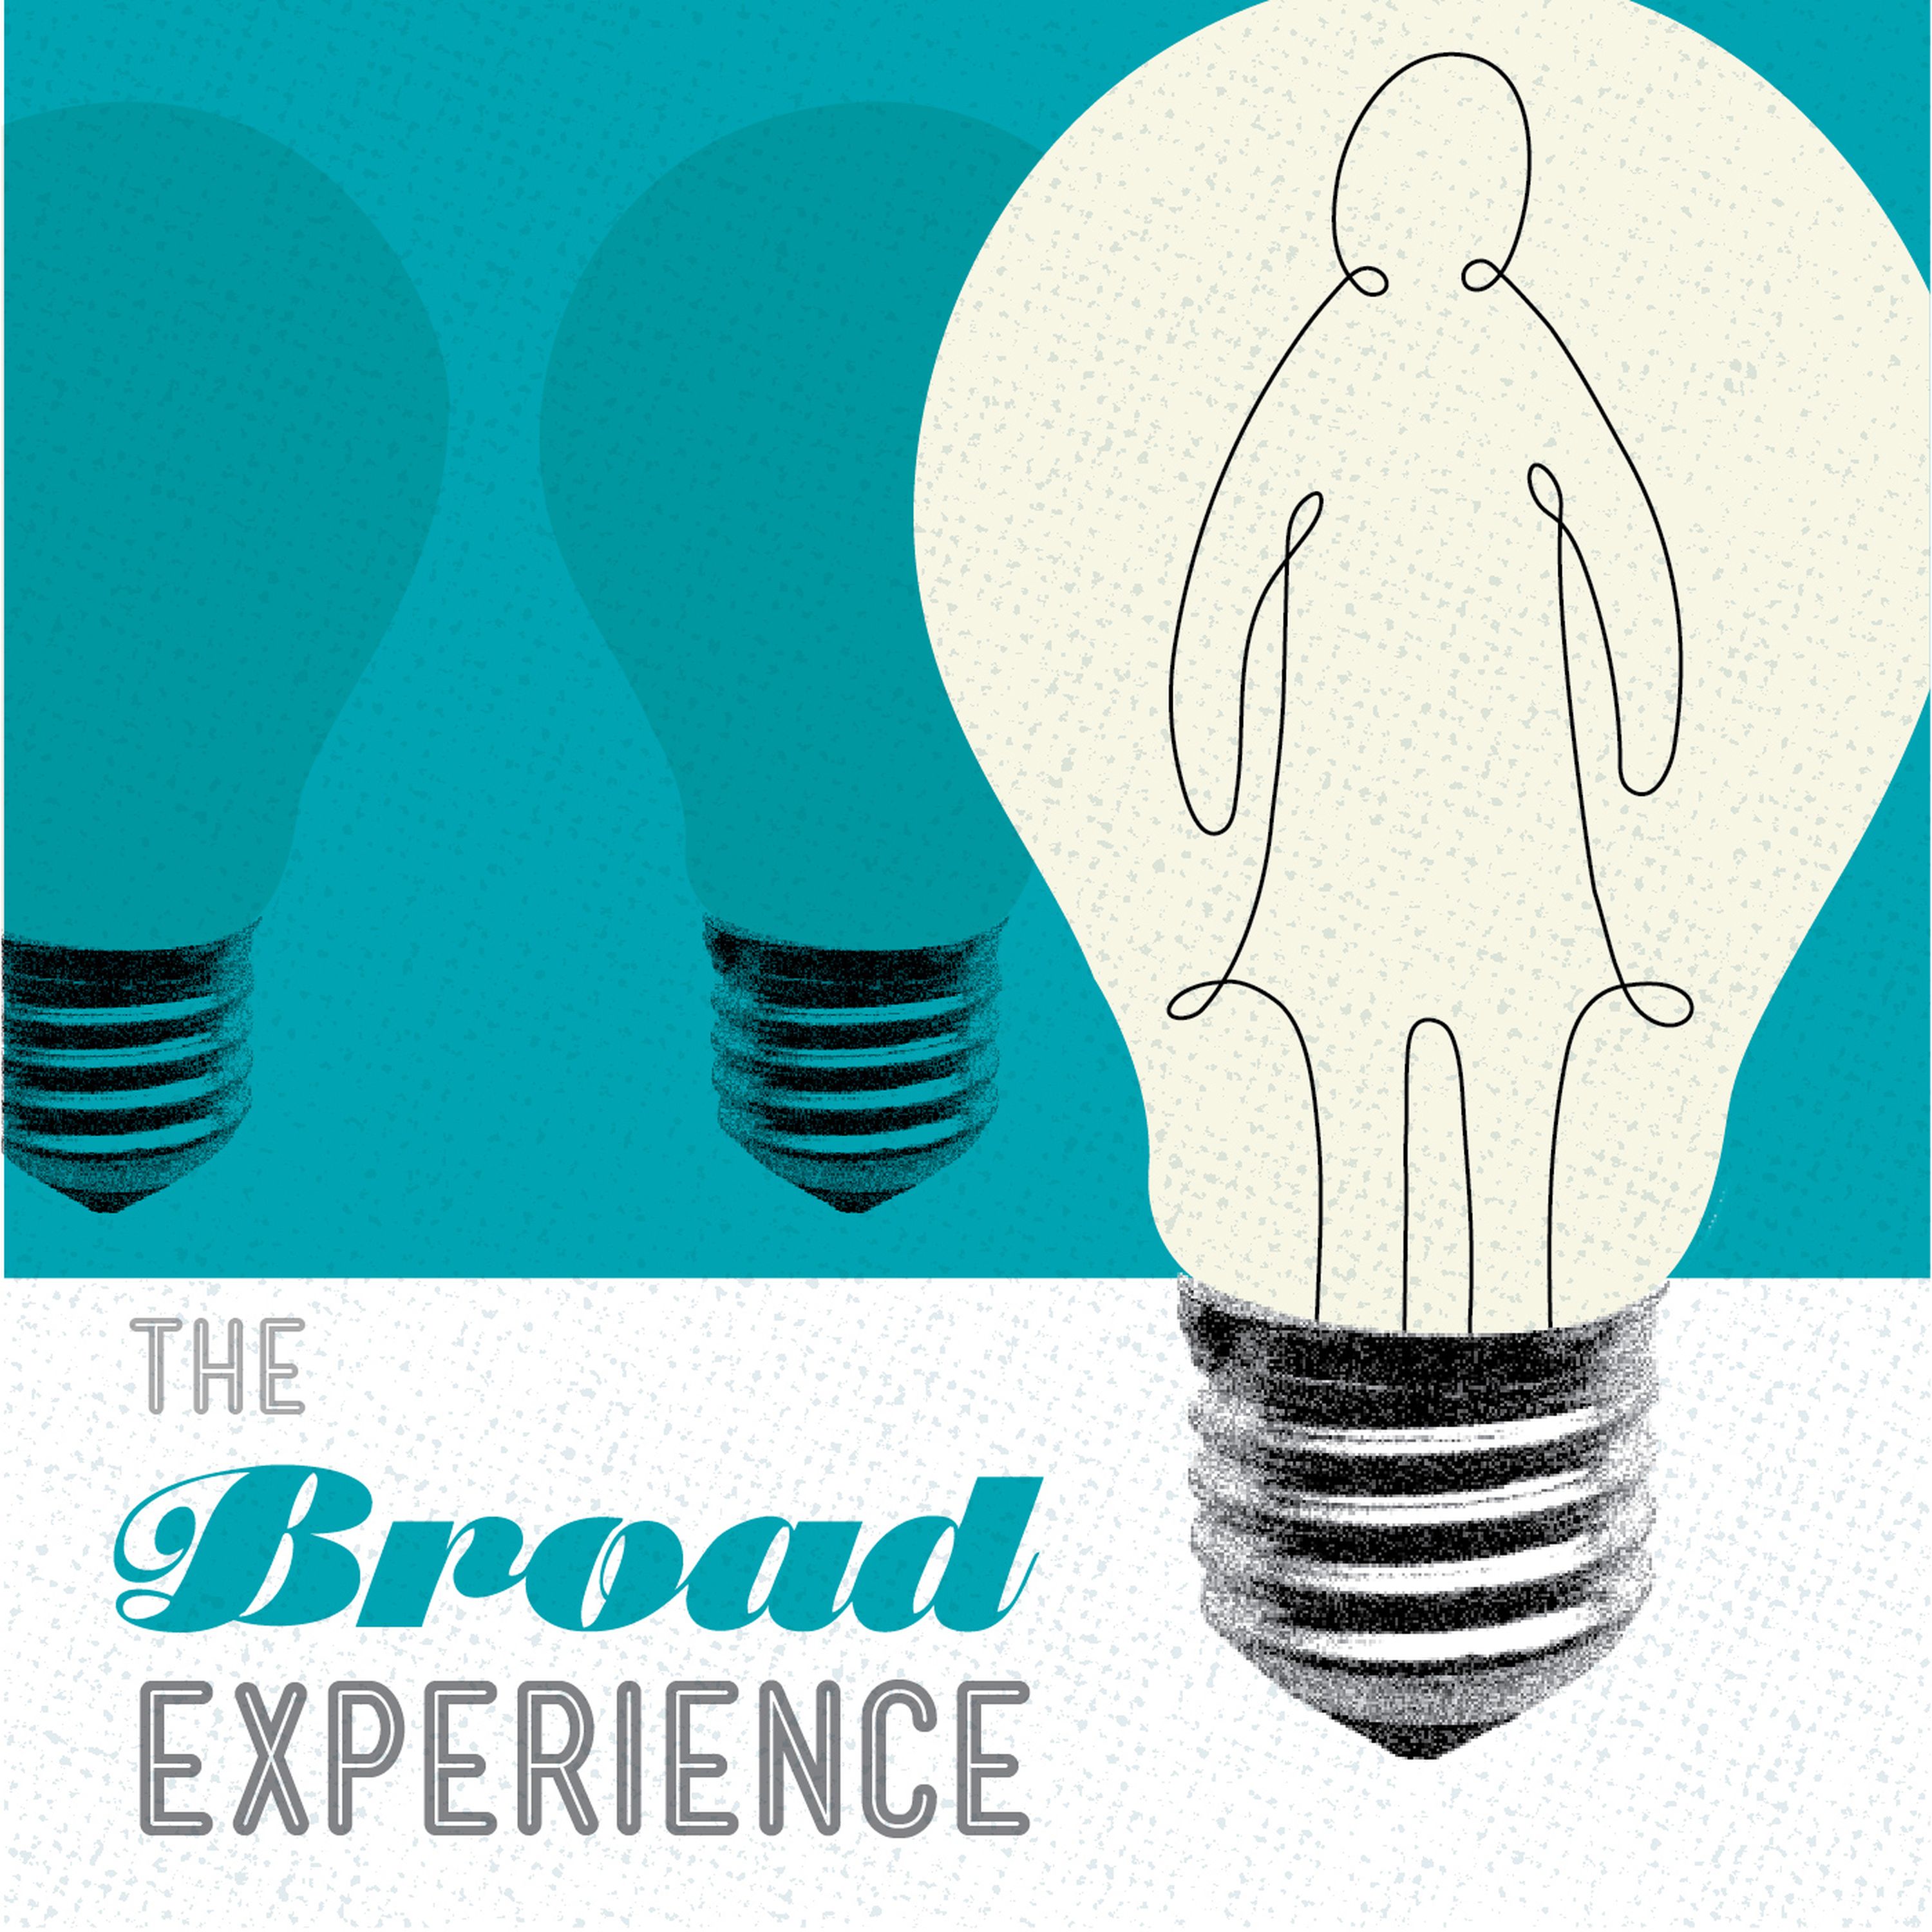 The Broad Experience 74: On Confidence